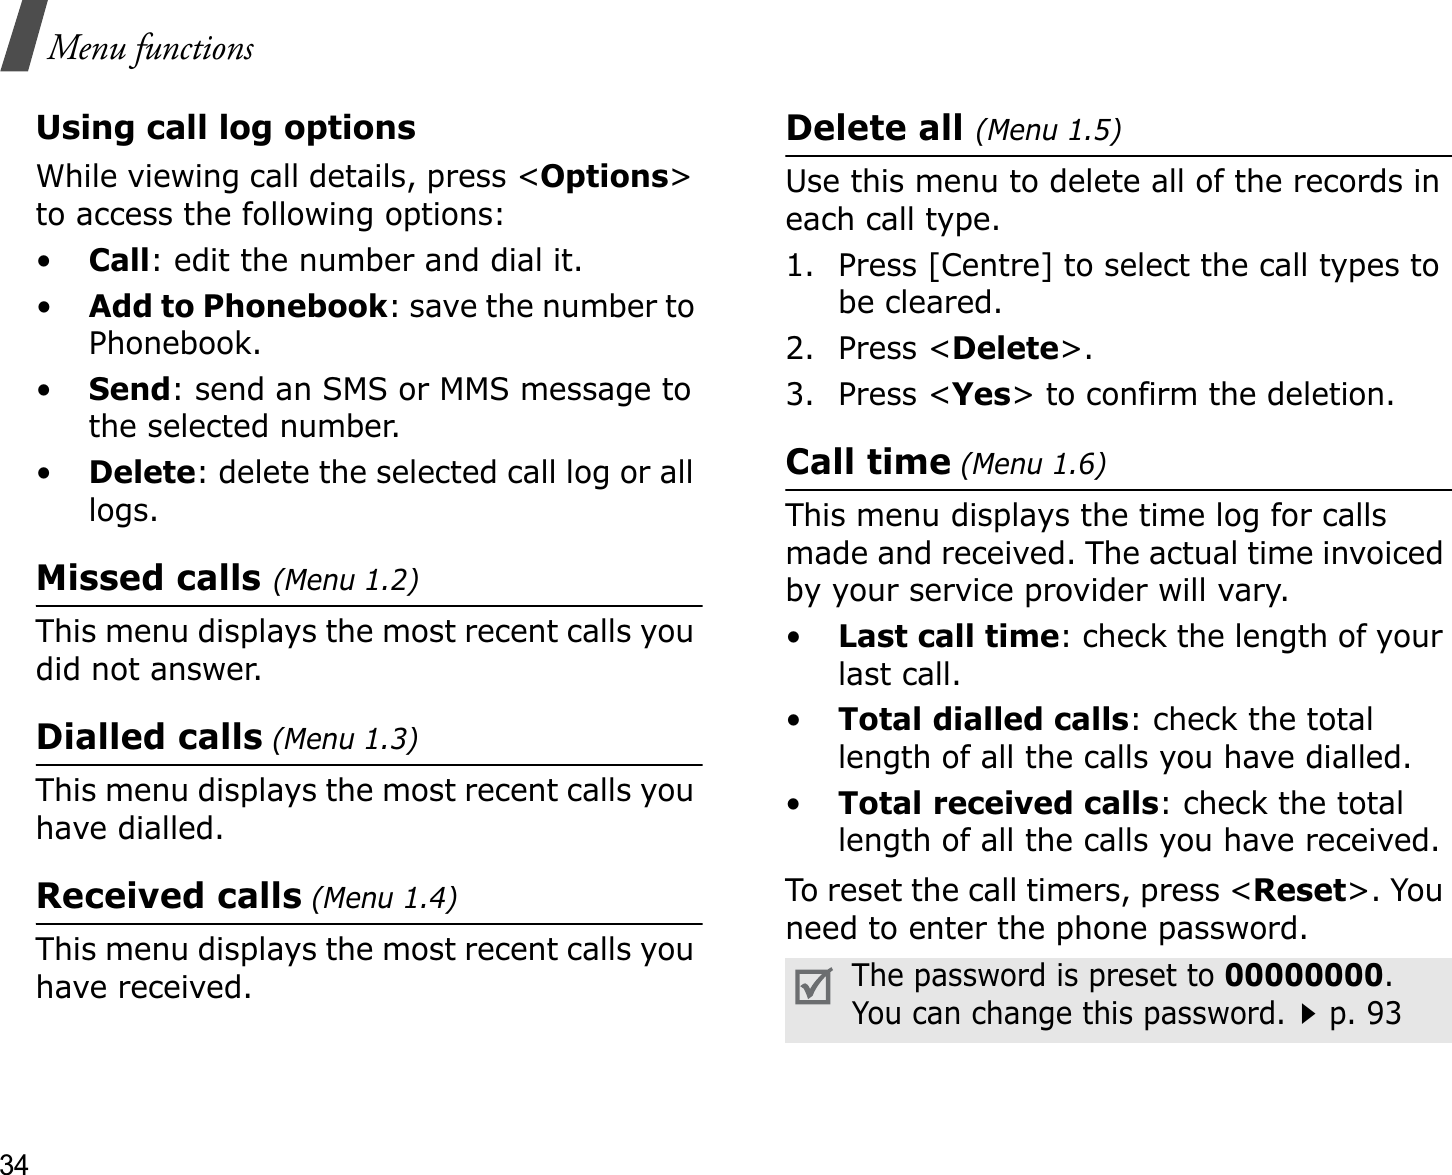 34Menu functionsUsing call log optionsWhile viewing call details, press &lt;Options&gt;to access the following options:•Call: edit the number and dial it.•Add to Phonebook: save the number to Phonebook.•Send: send an SMS or MMS message to the selected number.•Delete: delete the selected call log or all logs.Missed calls (Menu 1.2)This menu displays the most recent calls you did not answer.Dialled calls (Menu 1.3)This menu displays the most recent calls you have dialled.Received calls (Menu 1.4)This menu displays the most recent calls you have received. Delete all (Menu 1.5)Use this menu to delete all of the records in each call type.1. Press [Centre] to select the call types to be cleared. 2. Press &lt;Delete&gt;.3. Press &lt;Yes&gt; to confirm the deletion.Call time (Menu 1.6)This menu displays the time log for calls made and received. The actual time invoiced by your service provider will vary.•Last call time: check the length of your last call.•Total dialled calls: check the total length of all the calls you have dialled.•Total received calls: check the total length of all the calls you have received.To reset the call timers, press &lt;Reset&gt;. You need to enter the phone password.The password is preset to 00000000.You can change this password.p. 93